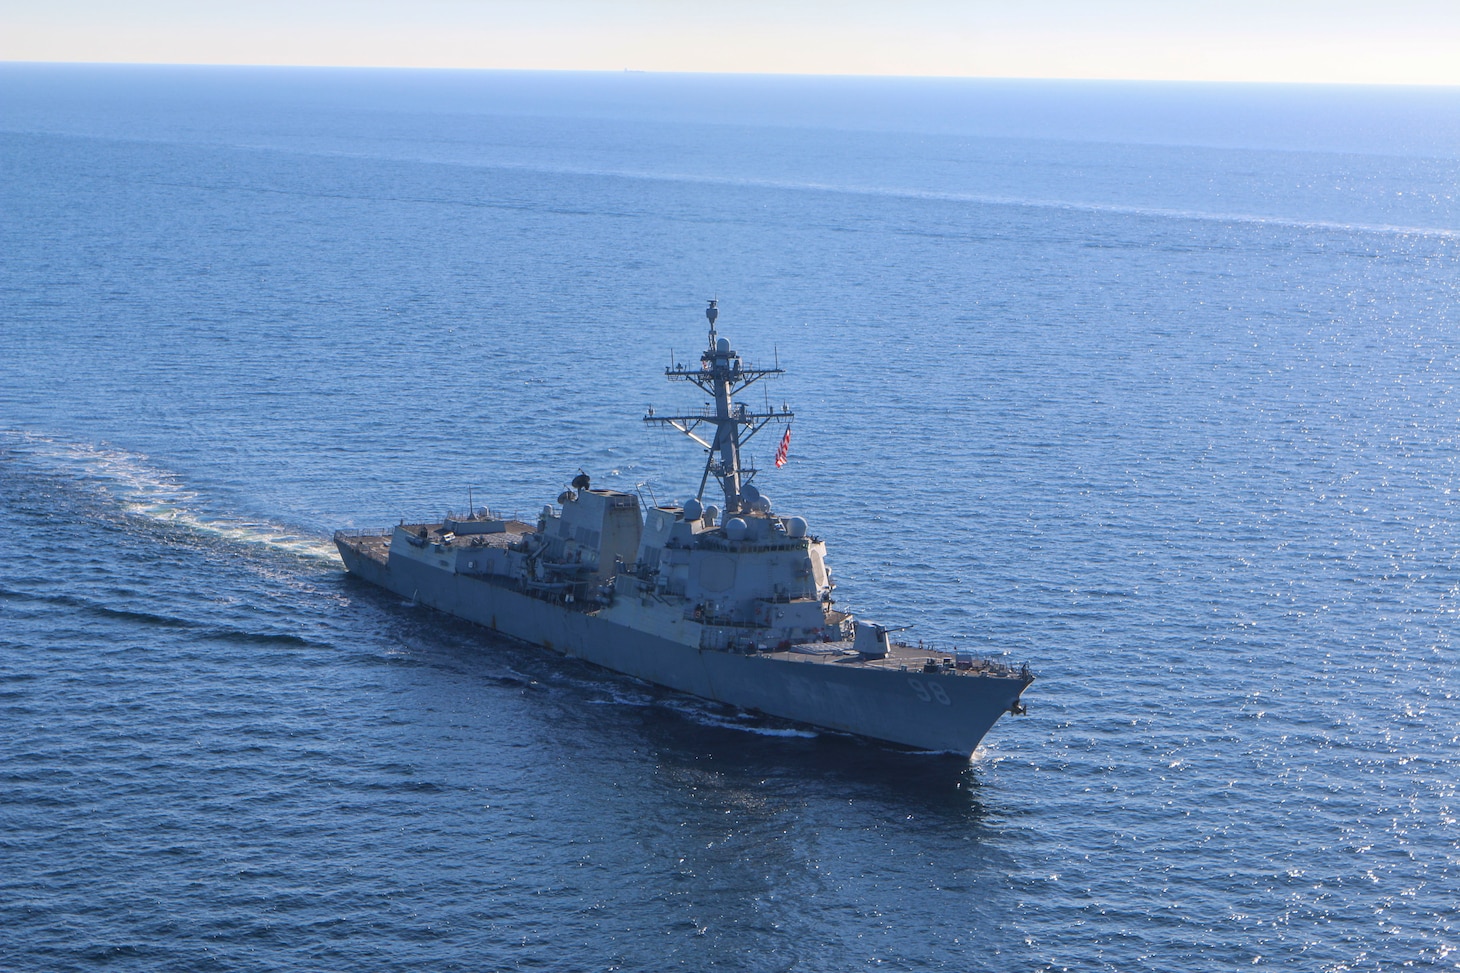 The Arleigh Burke-class guided-missile destroyer USS Forrest Sherman (DDG 98) conducts maneuvering drills in the Baltic Sea, March 9. Forrest Sherman is deployed to the European theater of operations and participating in a range of maritime activities in support of U.S. Sixth Fleet and NATO Allies. (U.S. Navy photo by Naval Air Crewman (Helicopter) 2nd Class Reuben Richardson)